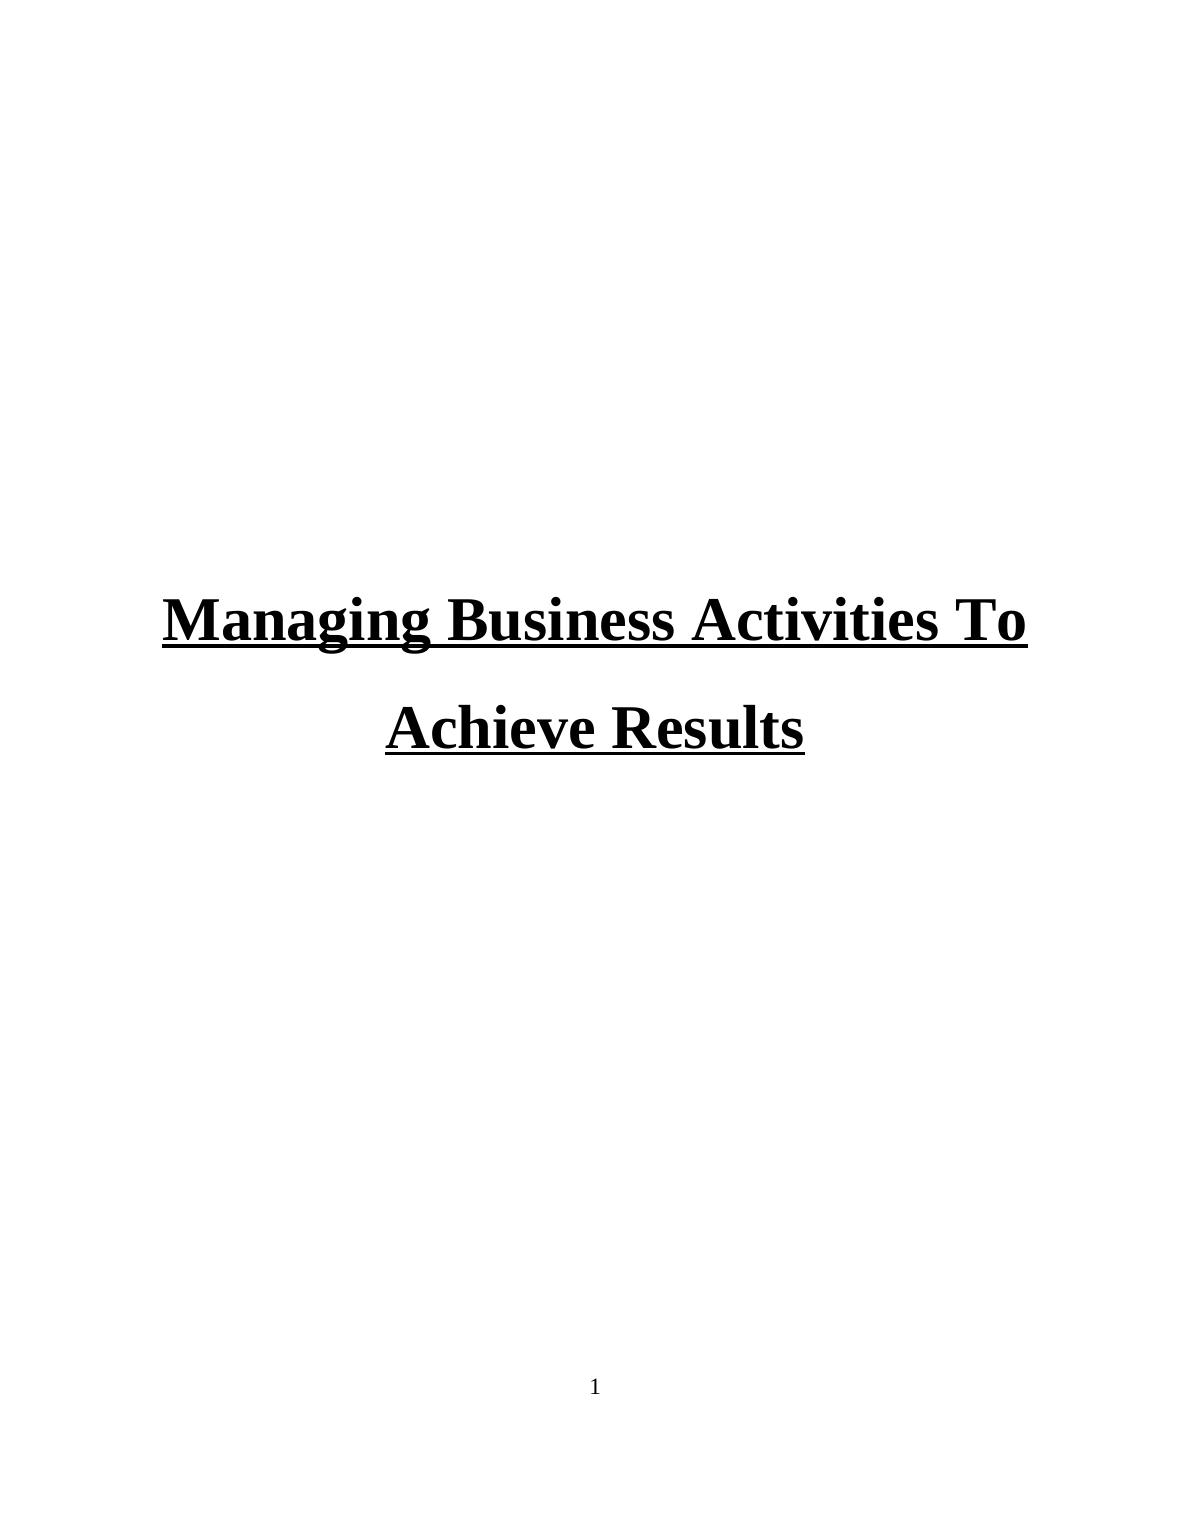 Managing Business Activities To Achieve Results Assignment_1